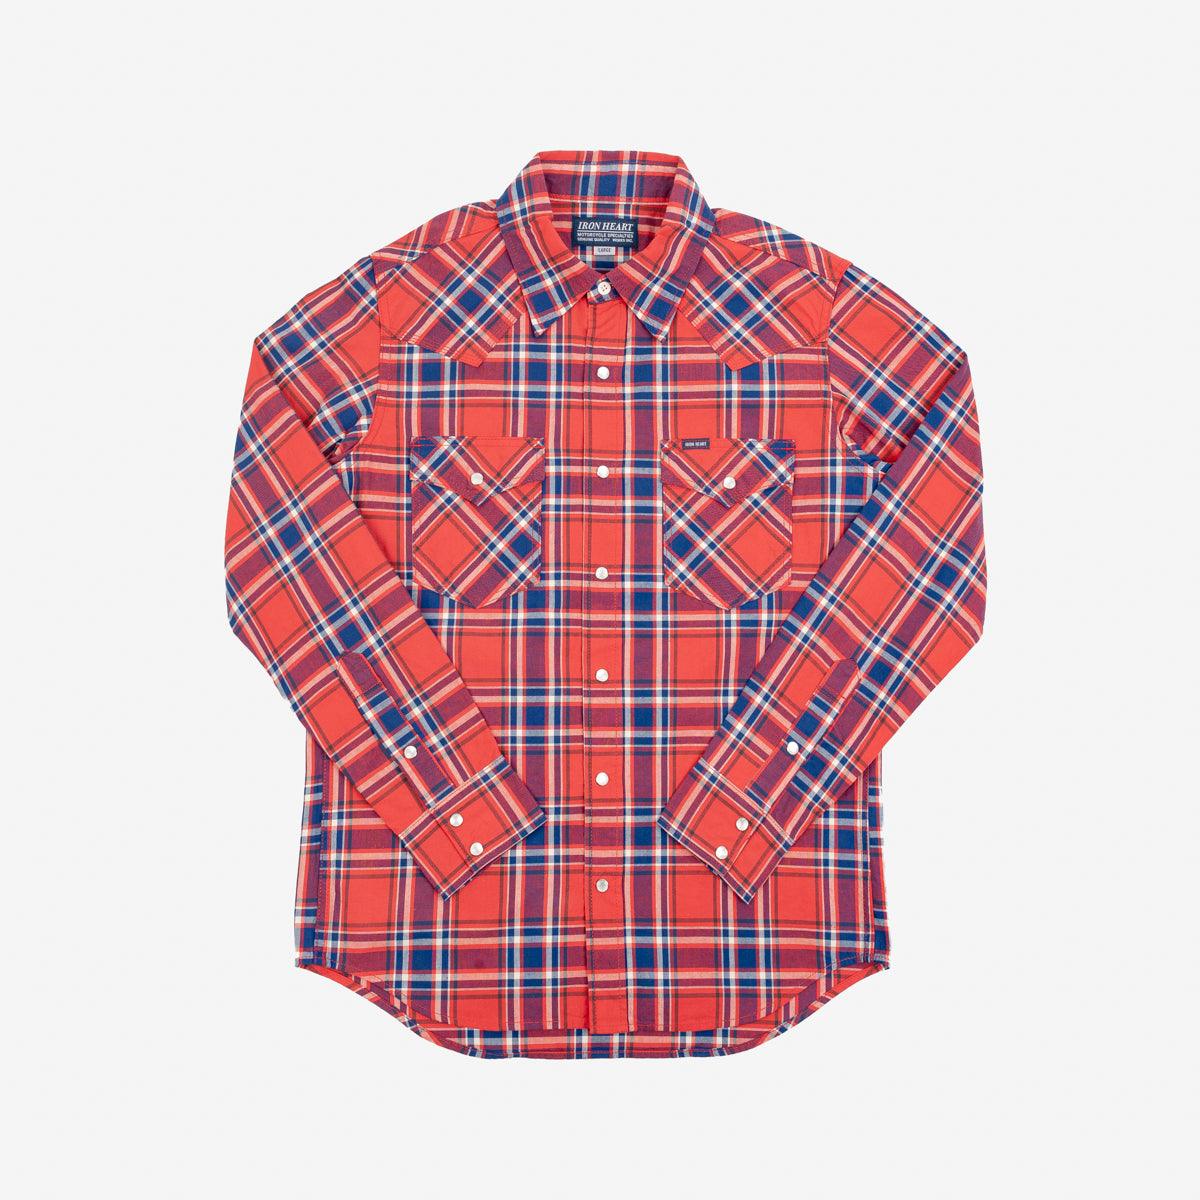 IHSH-355-RED - 5oz Selvedge Madras Check Western Shirt - Red